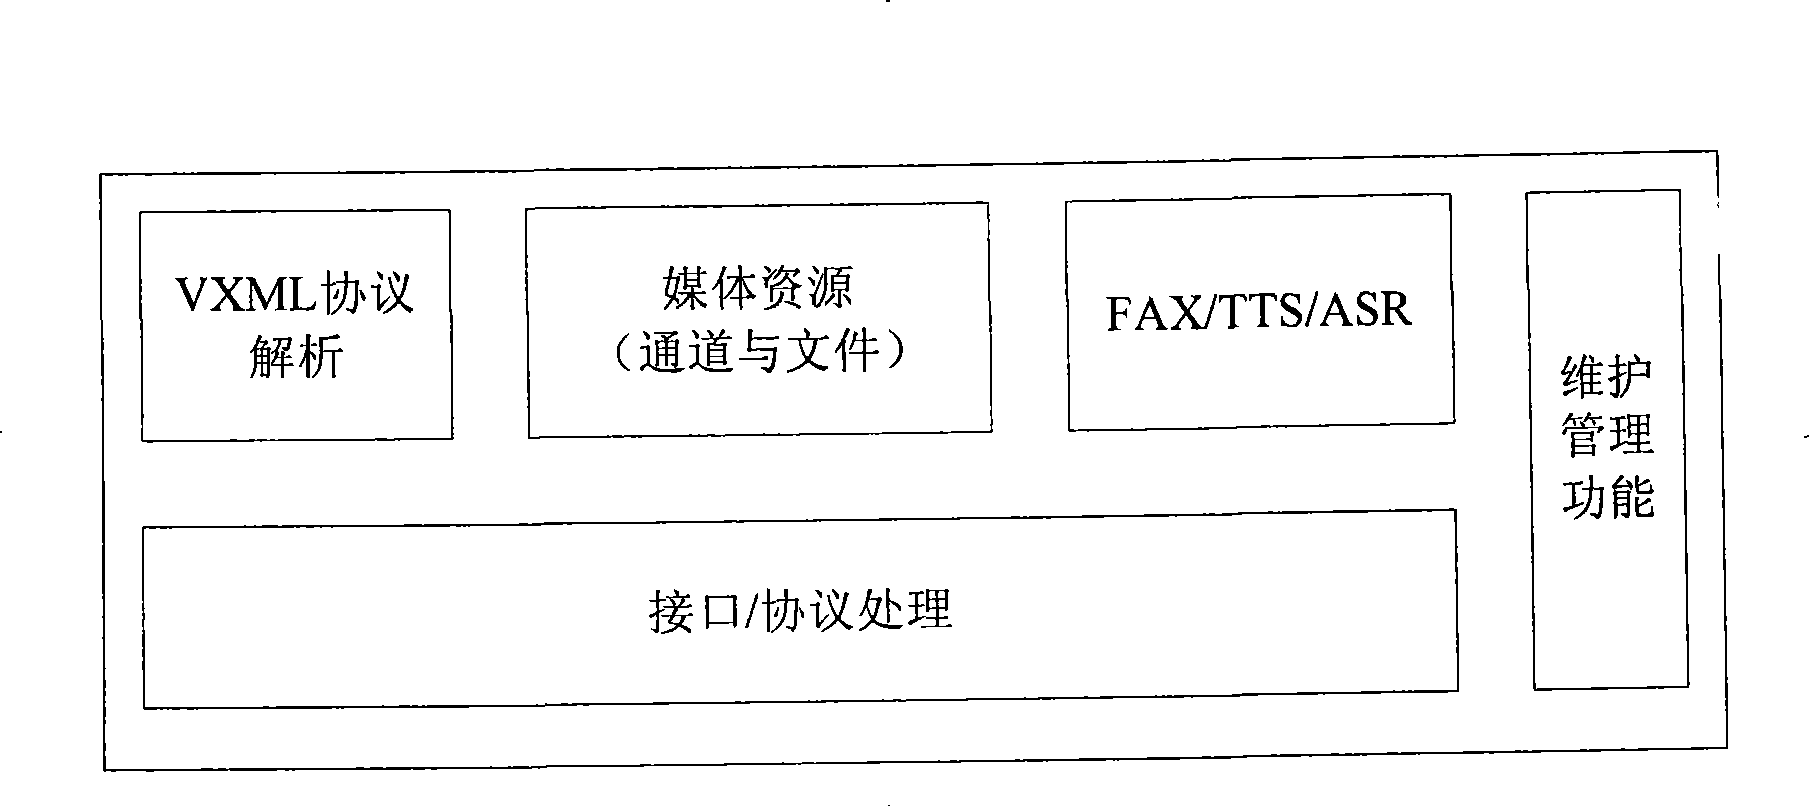 Multi-language voice recognition method and system based on soft queuing call center